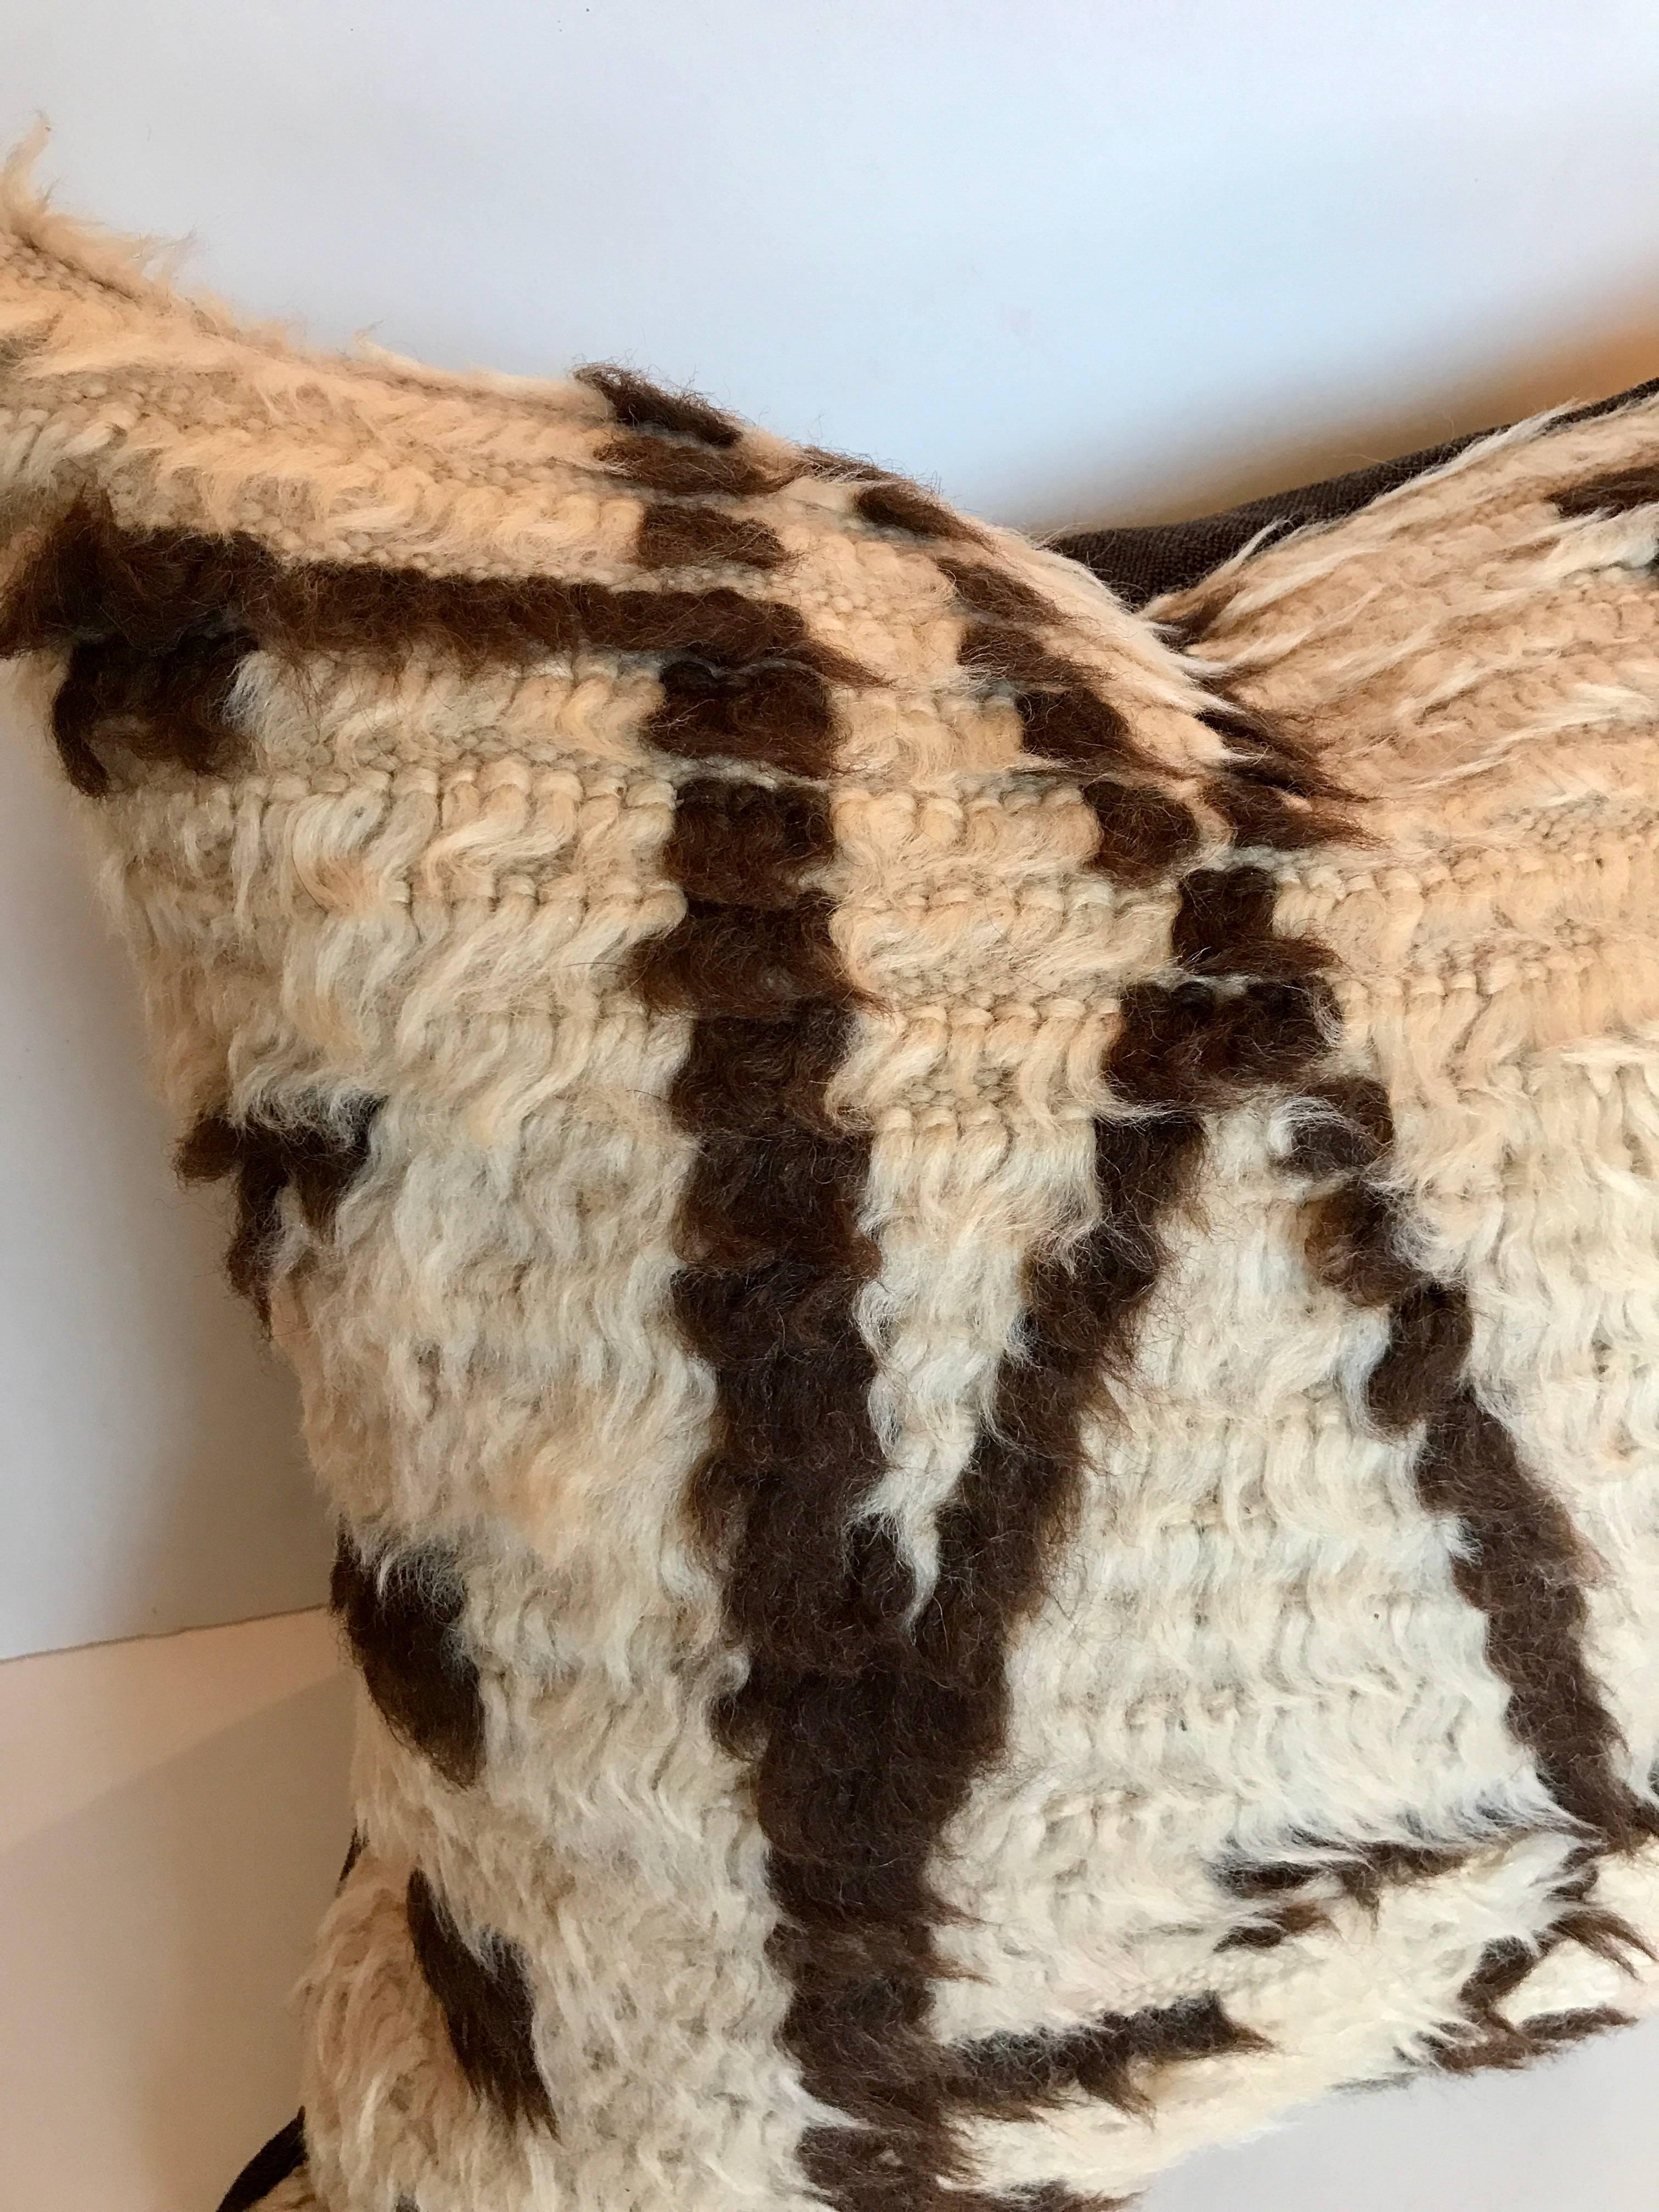 Custom pillow cut from a vintage hand loomed wool Moroccan Azilal rug made by the Berber tribes of the Atlas Mountains. Wool is soft and lustrous with natural colors in abstract tribal designs. Pillow is backed in a linen blend, filled with an